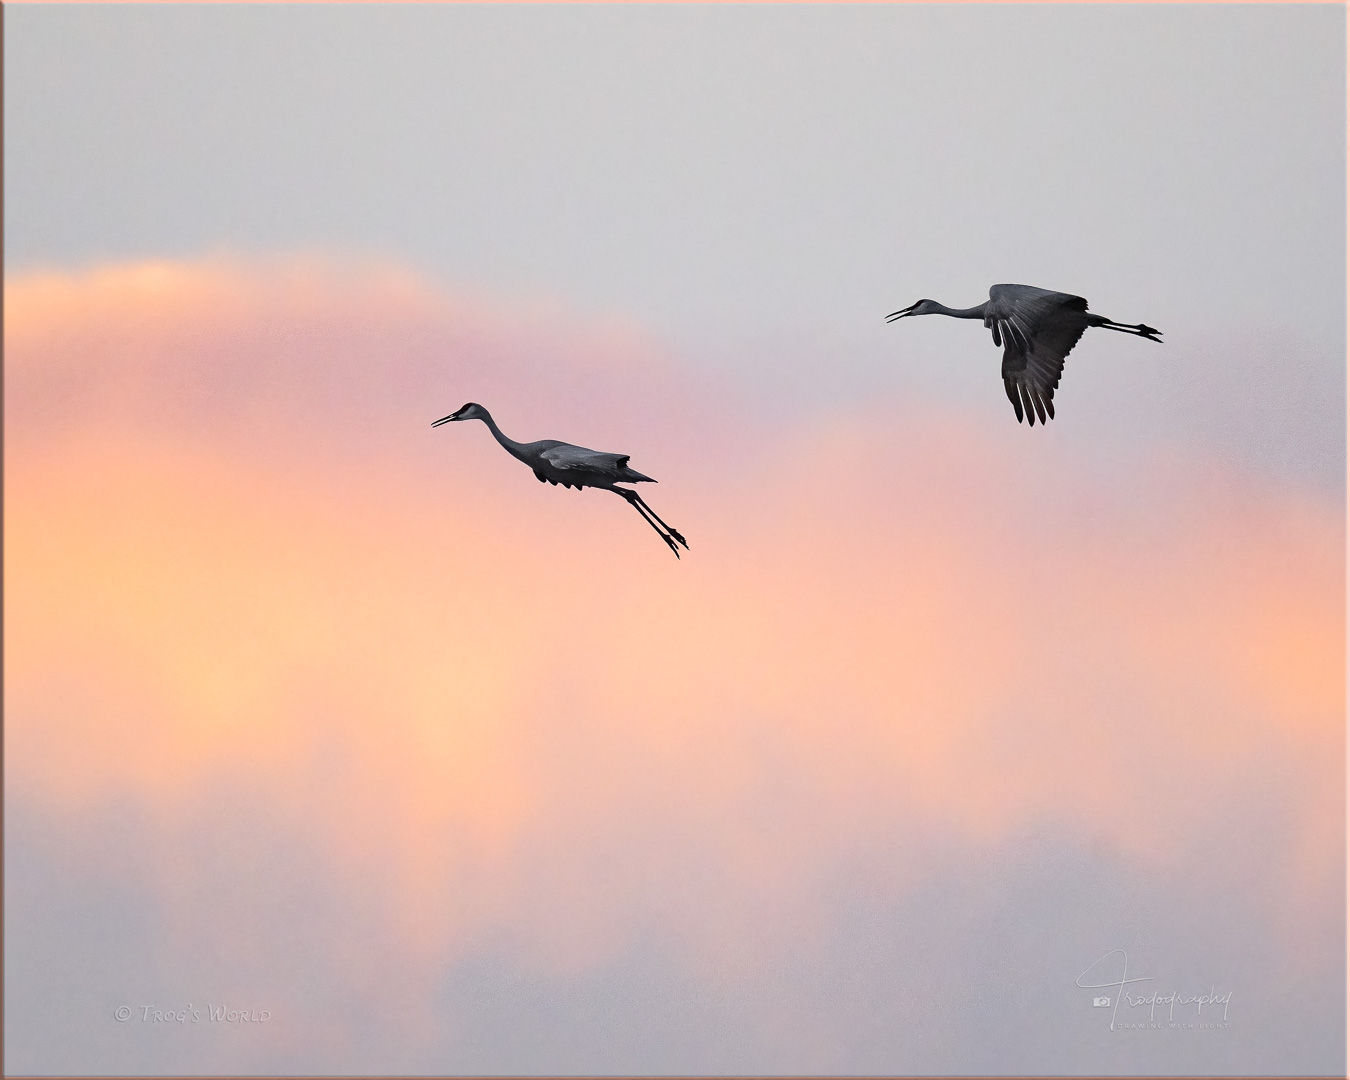 Sandhill Cranes approaching their roosting field against the evening clouds